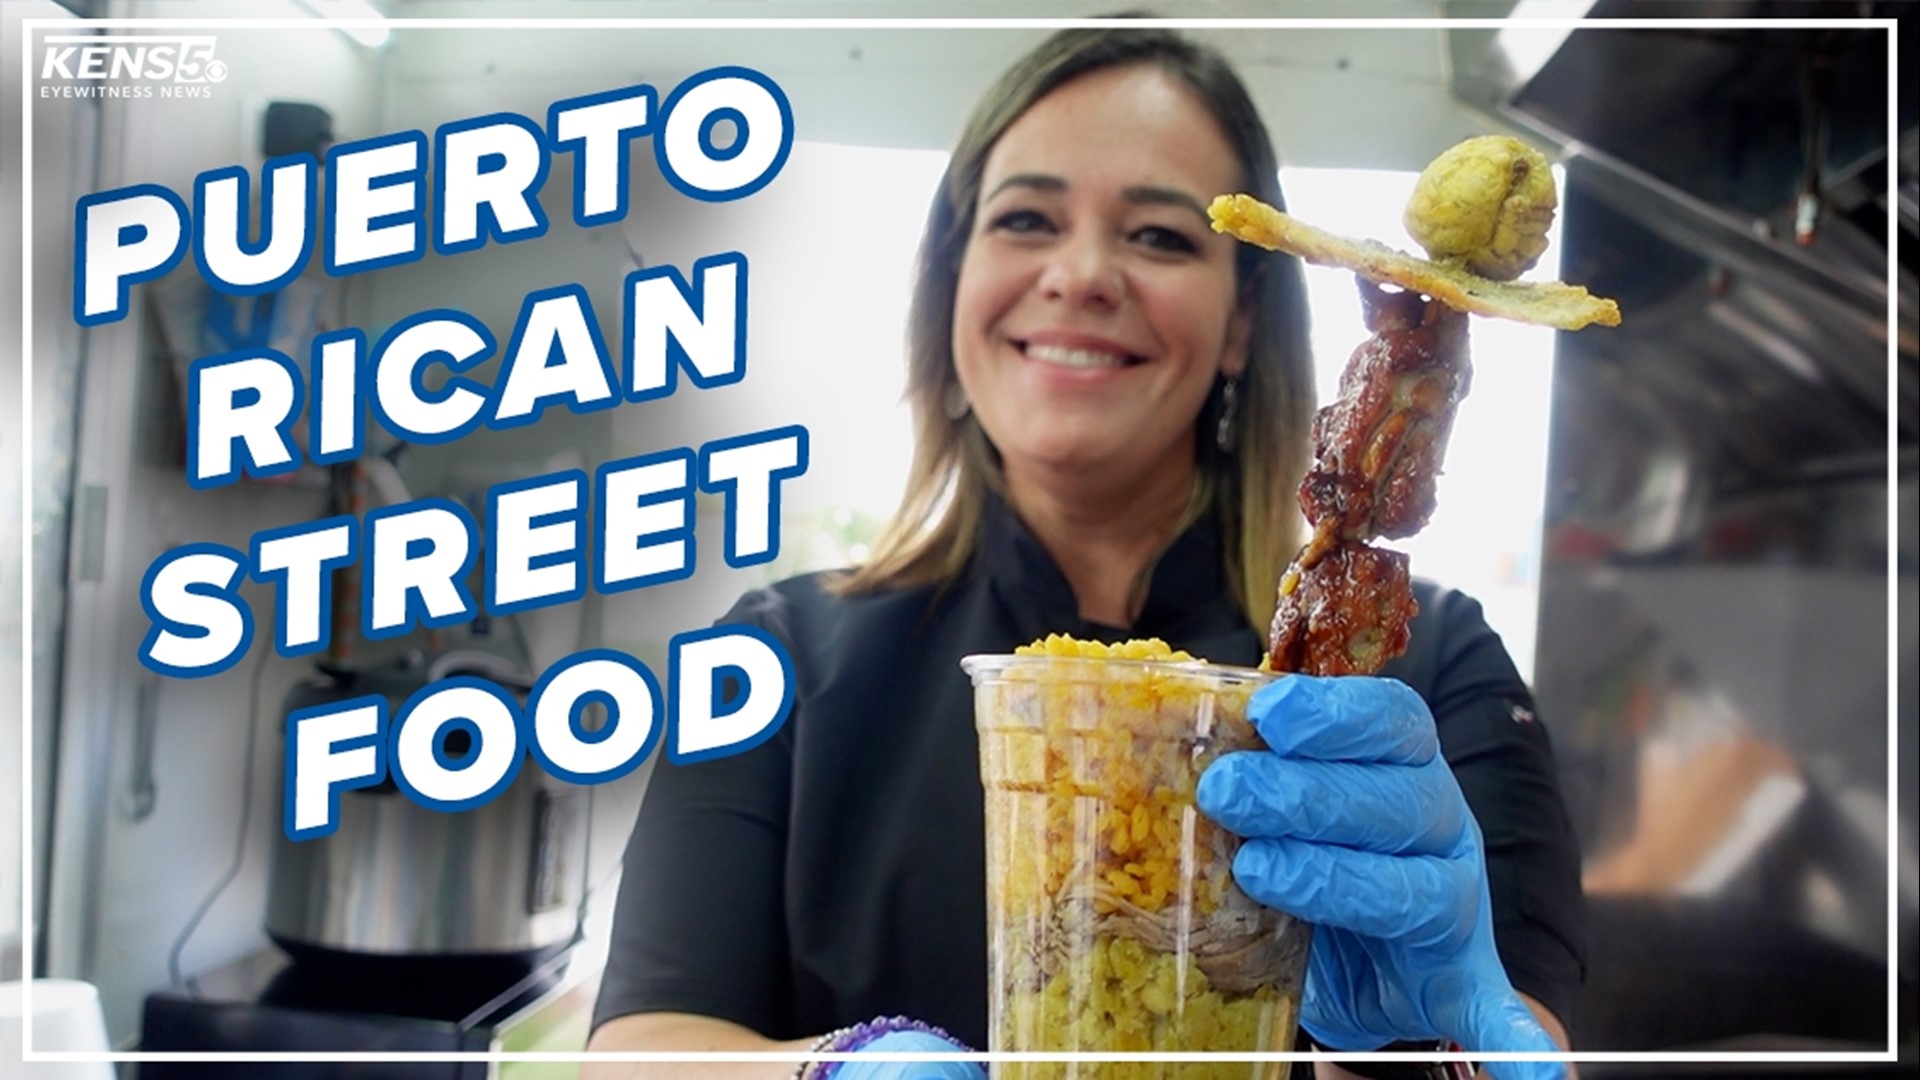 From the mofongo to the arepas, it's difficult to find eats like this in the San Antonio area.